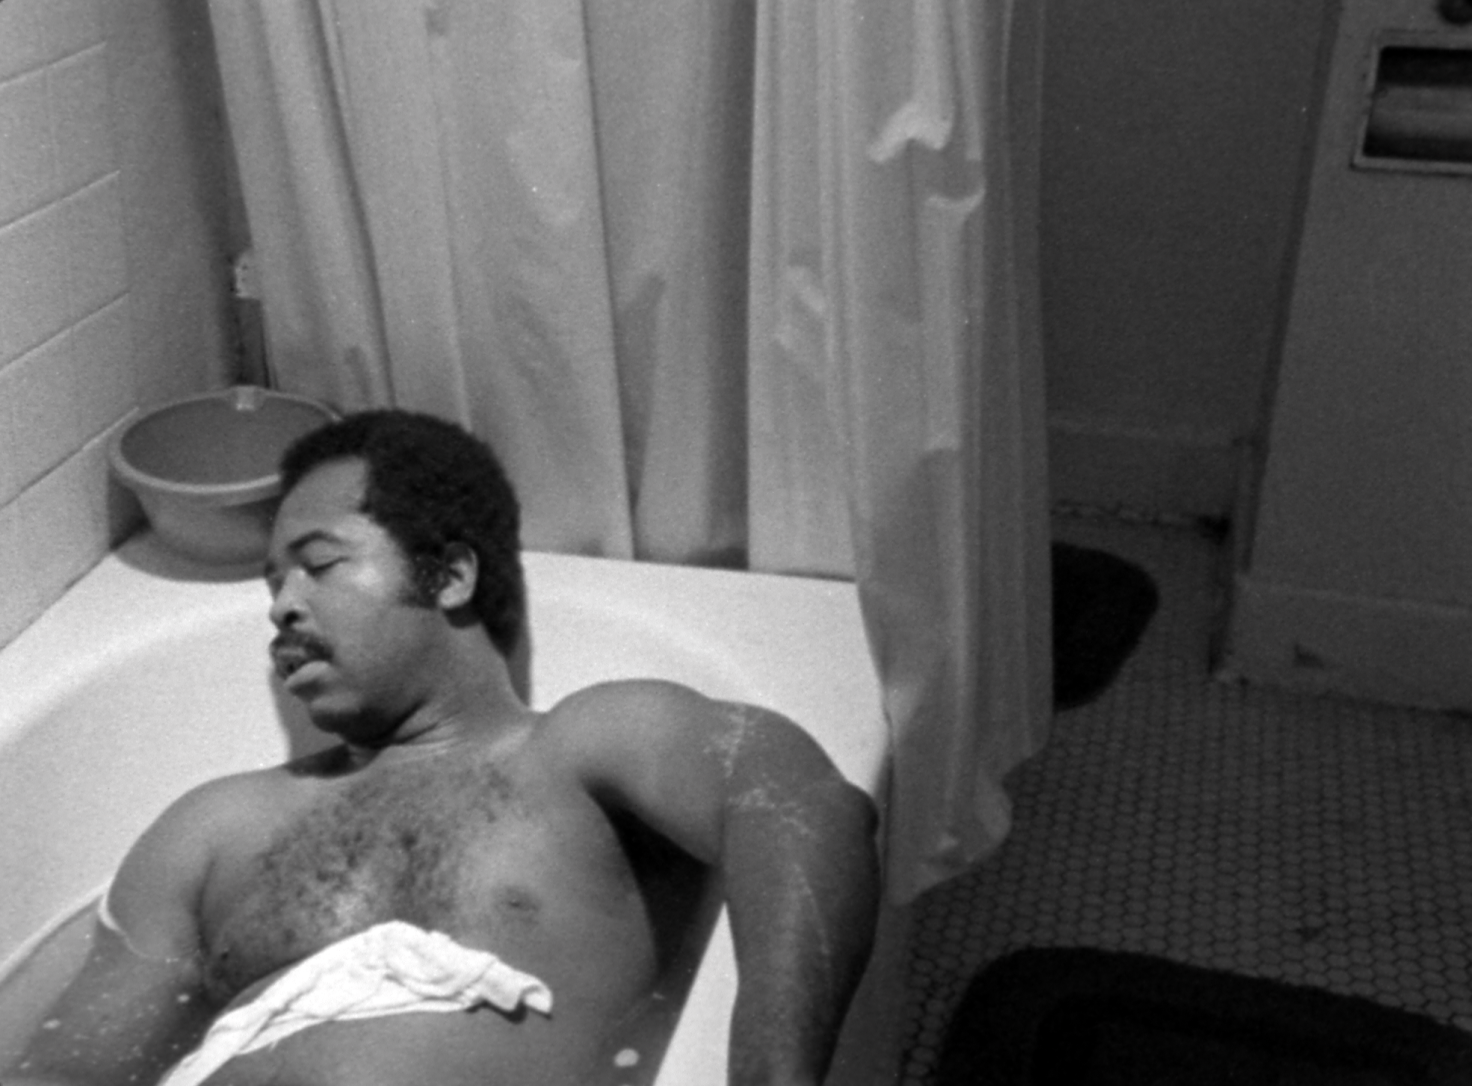 A Black person seems to be asleep in a bathtub, shirtless, shot in black and white.